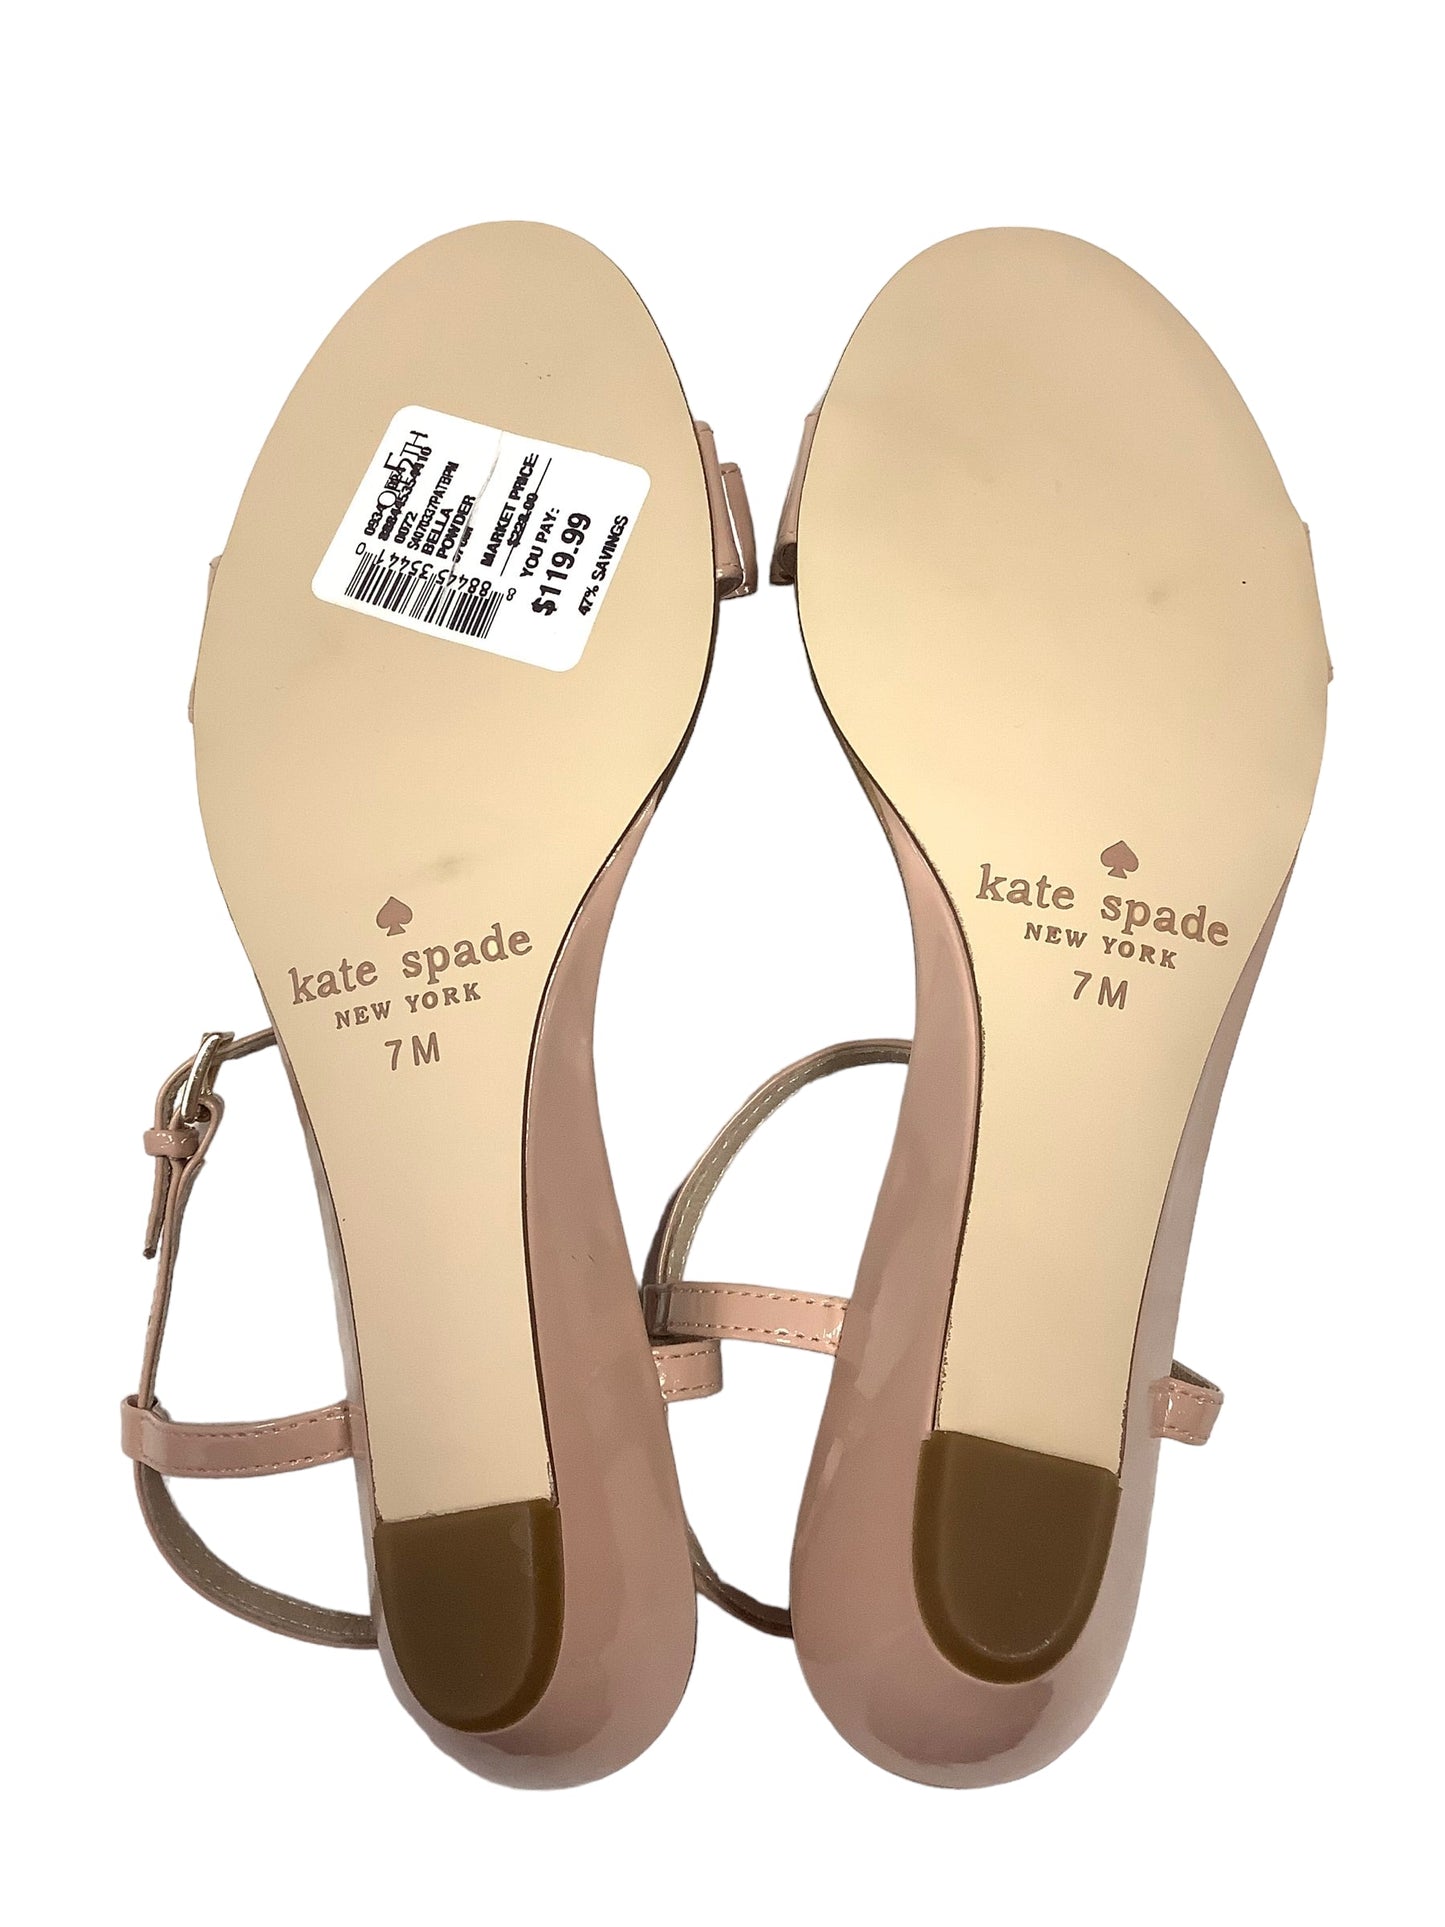 Sandals Heels Wedge By Kate Spade  Size: 7